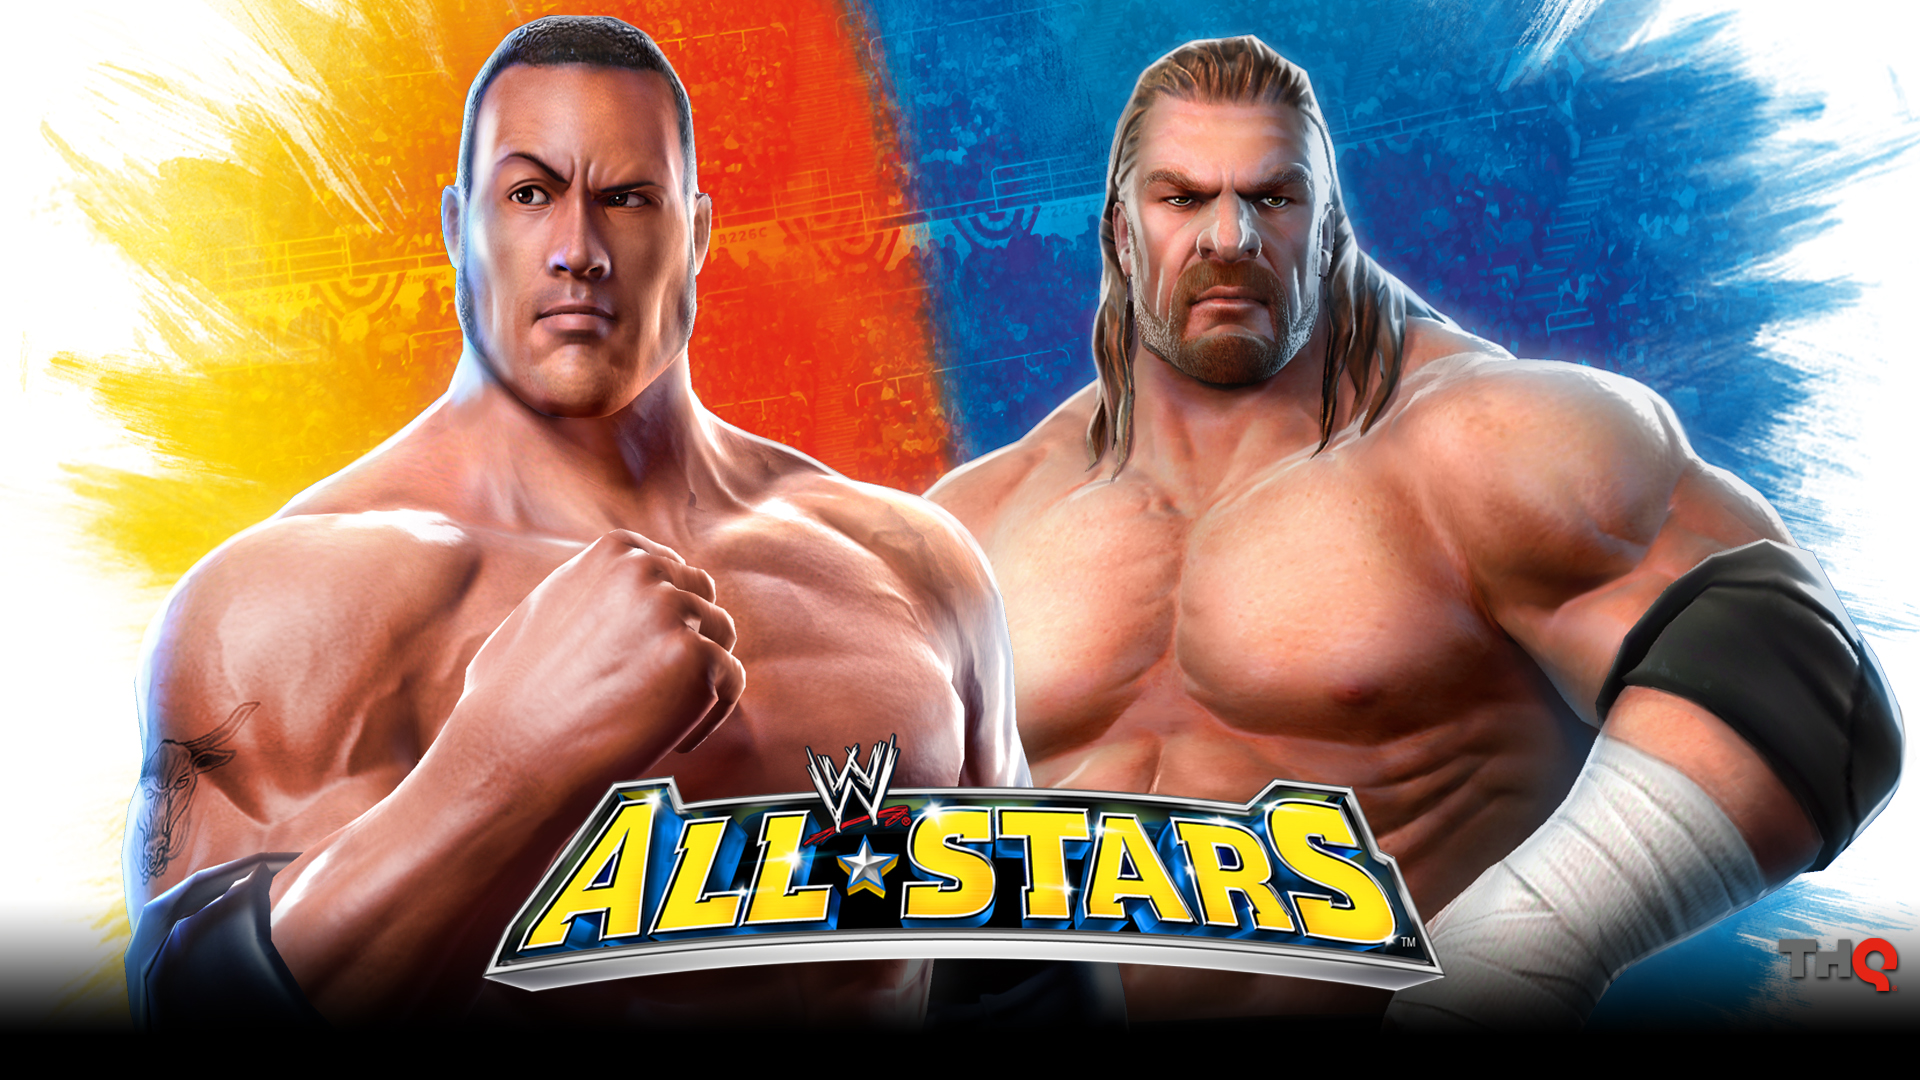 Nice Images Collection: WWE All Stars Desktop Wallpapers